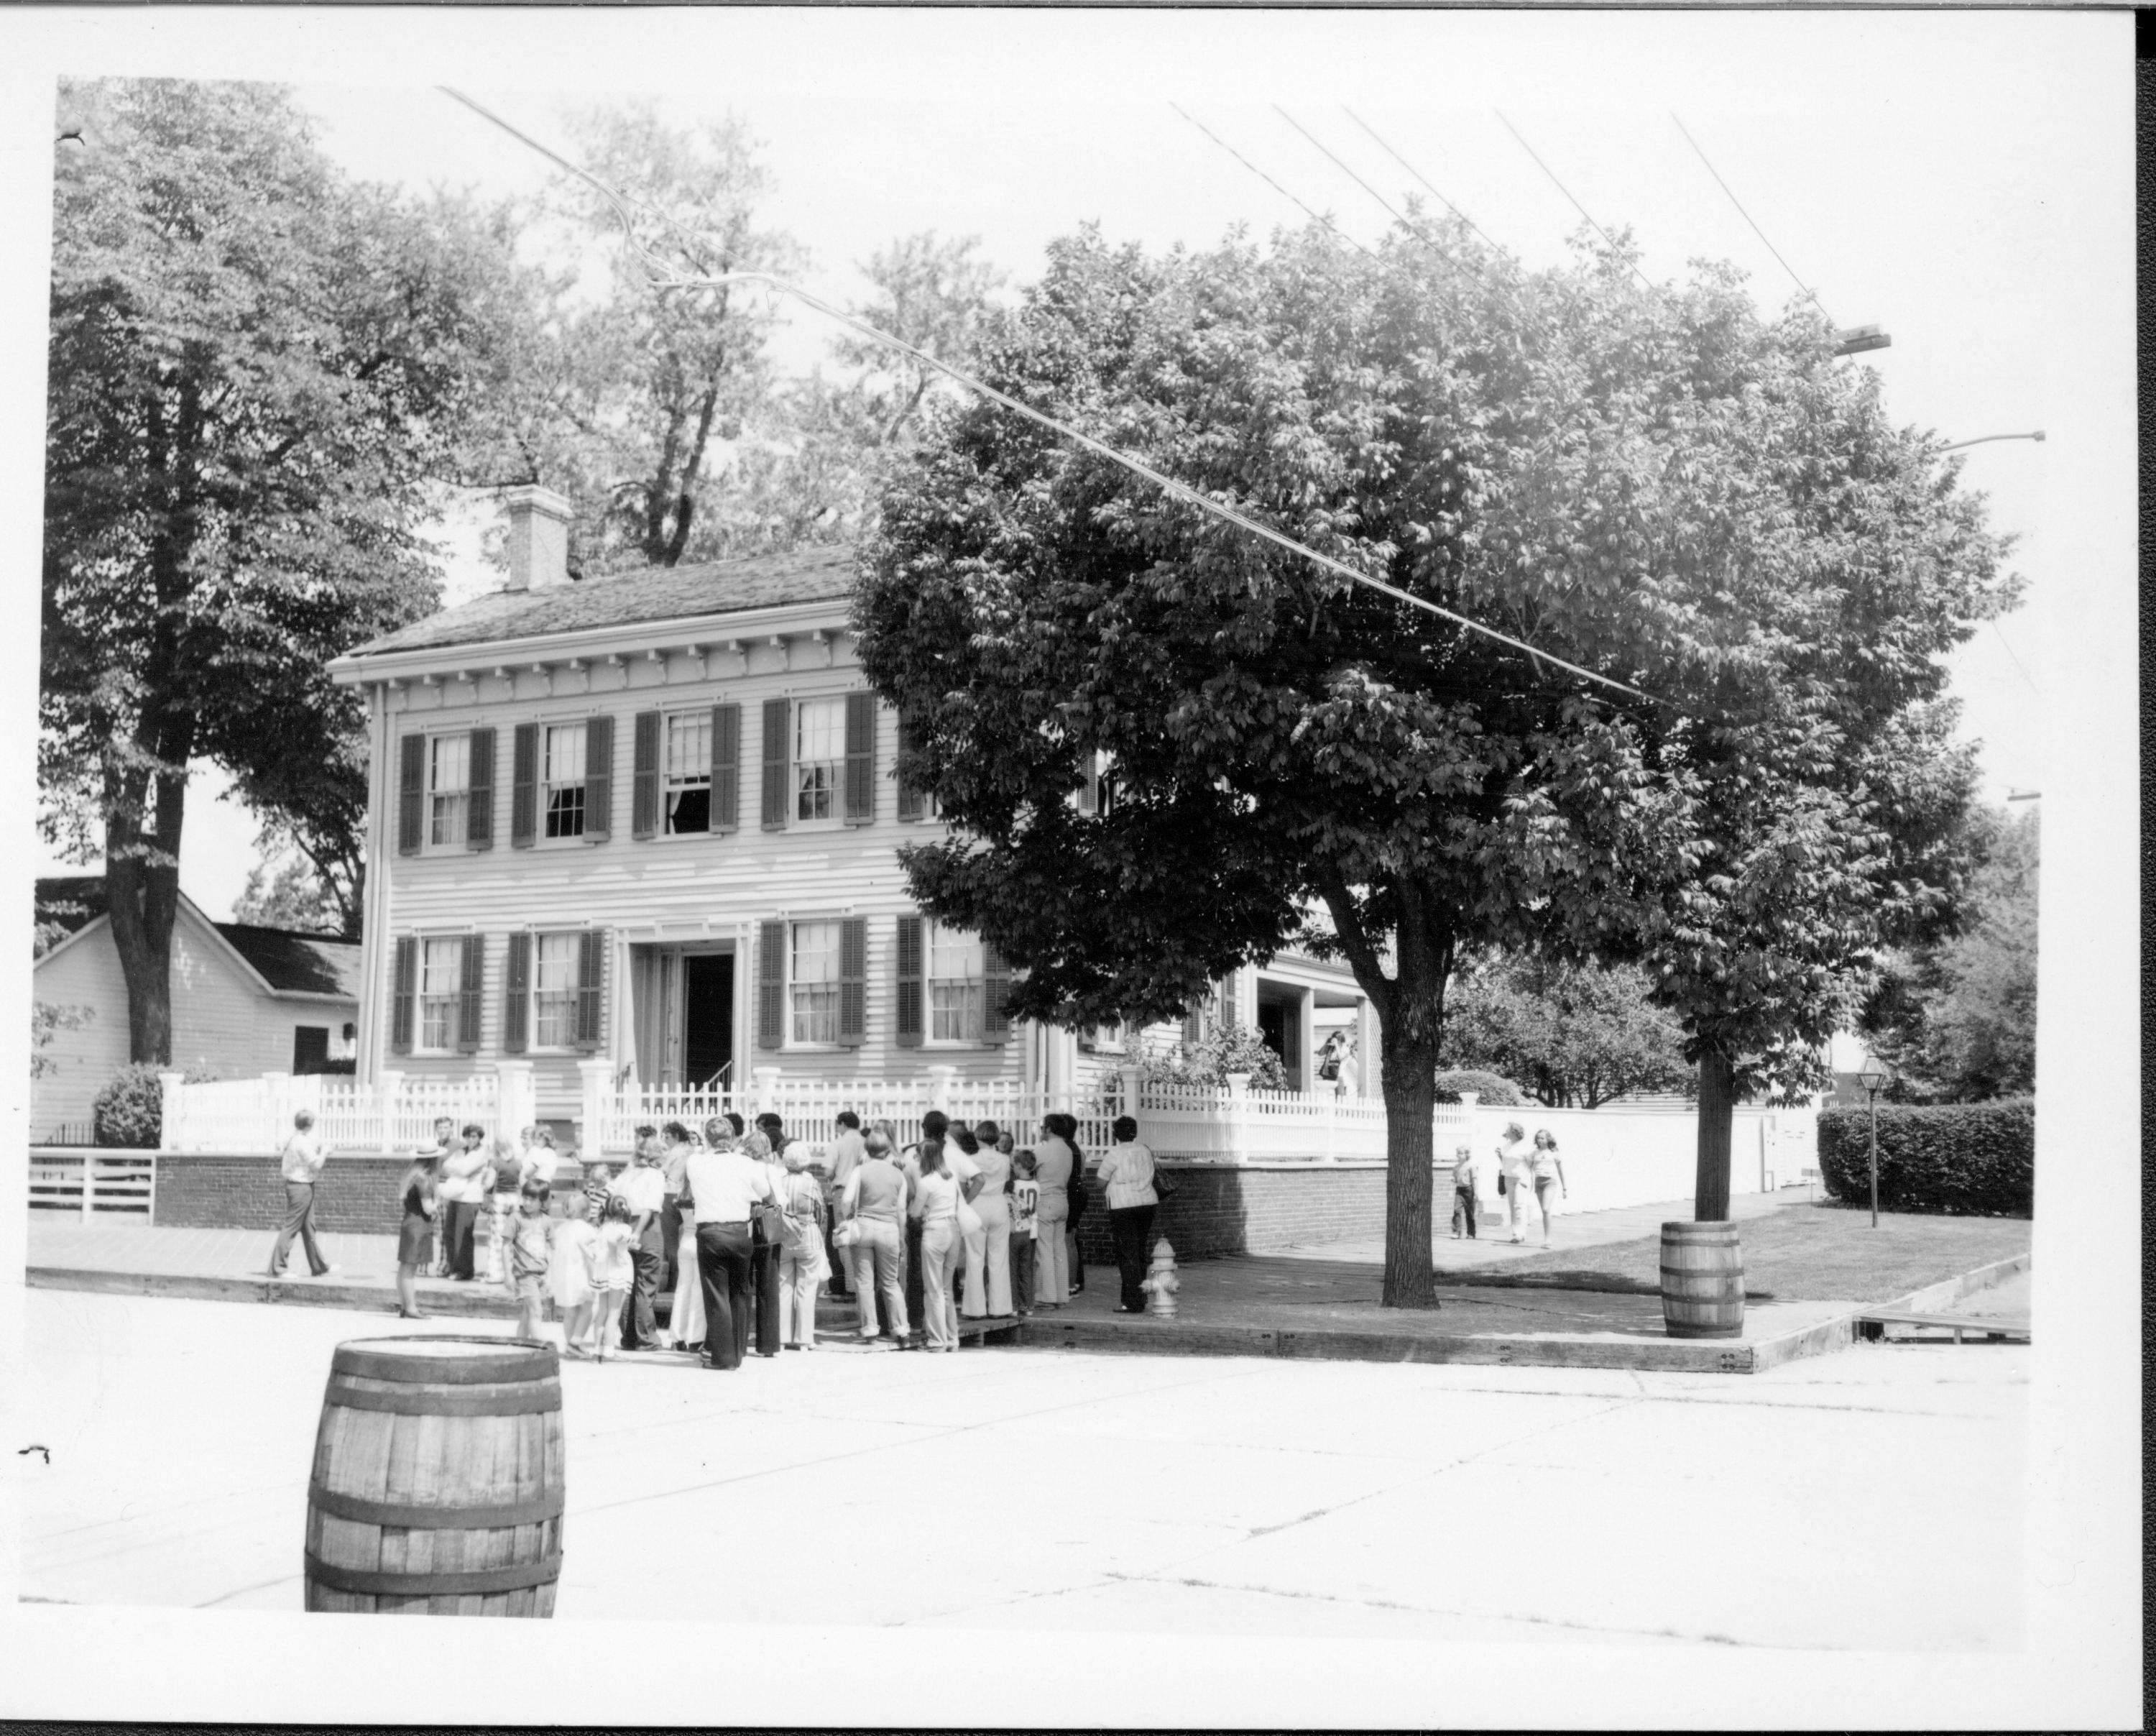 Lincoln Home front (West) elevation with visitors gathering in front of house listening to ranger in ranger hat on left standing in street. Other visitors visible on back porch and walking along boarwalk on south side of house. Trash barrels on corners near intersection. Fire hydrant on brick plaza near corner of house. Corneau House on far left. Electrical lines seen overhead.   Looking Northeast from 8th and Jackson Street intersection Lincoln Home, visitors, staff, Corneau, trash barrels, fire hydrant, 8th, Jackson